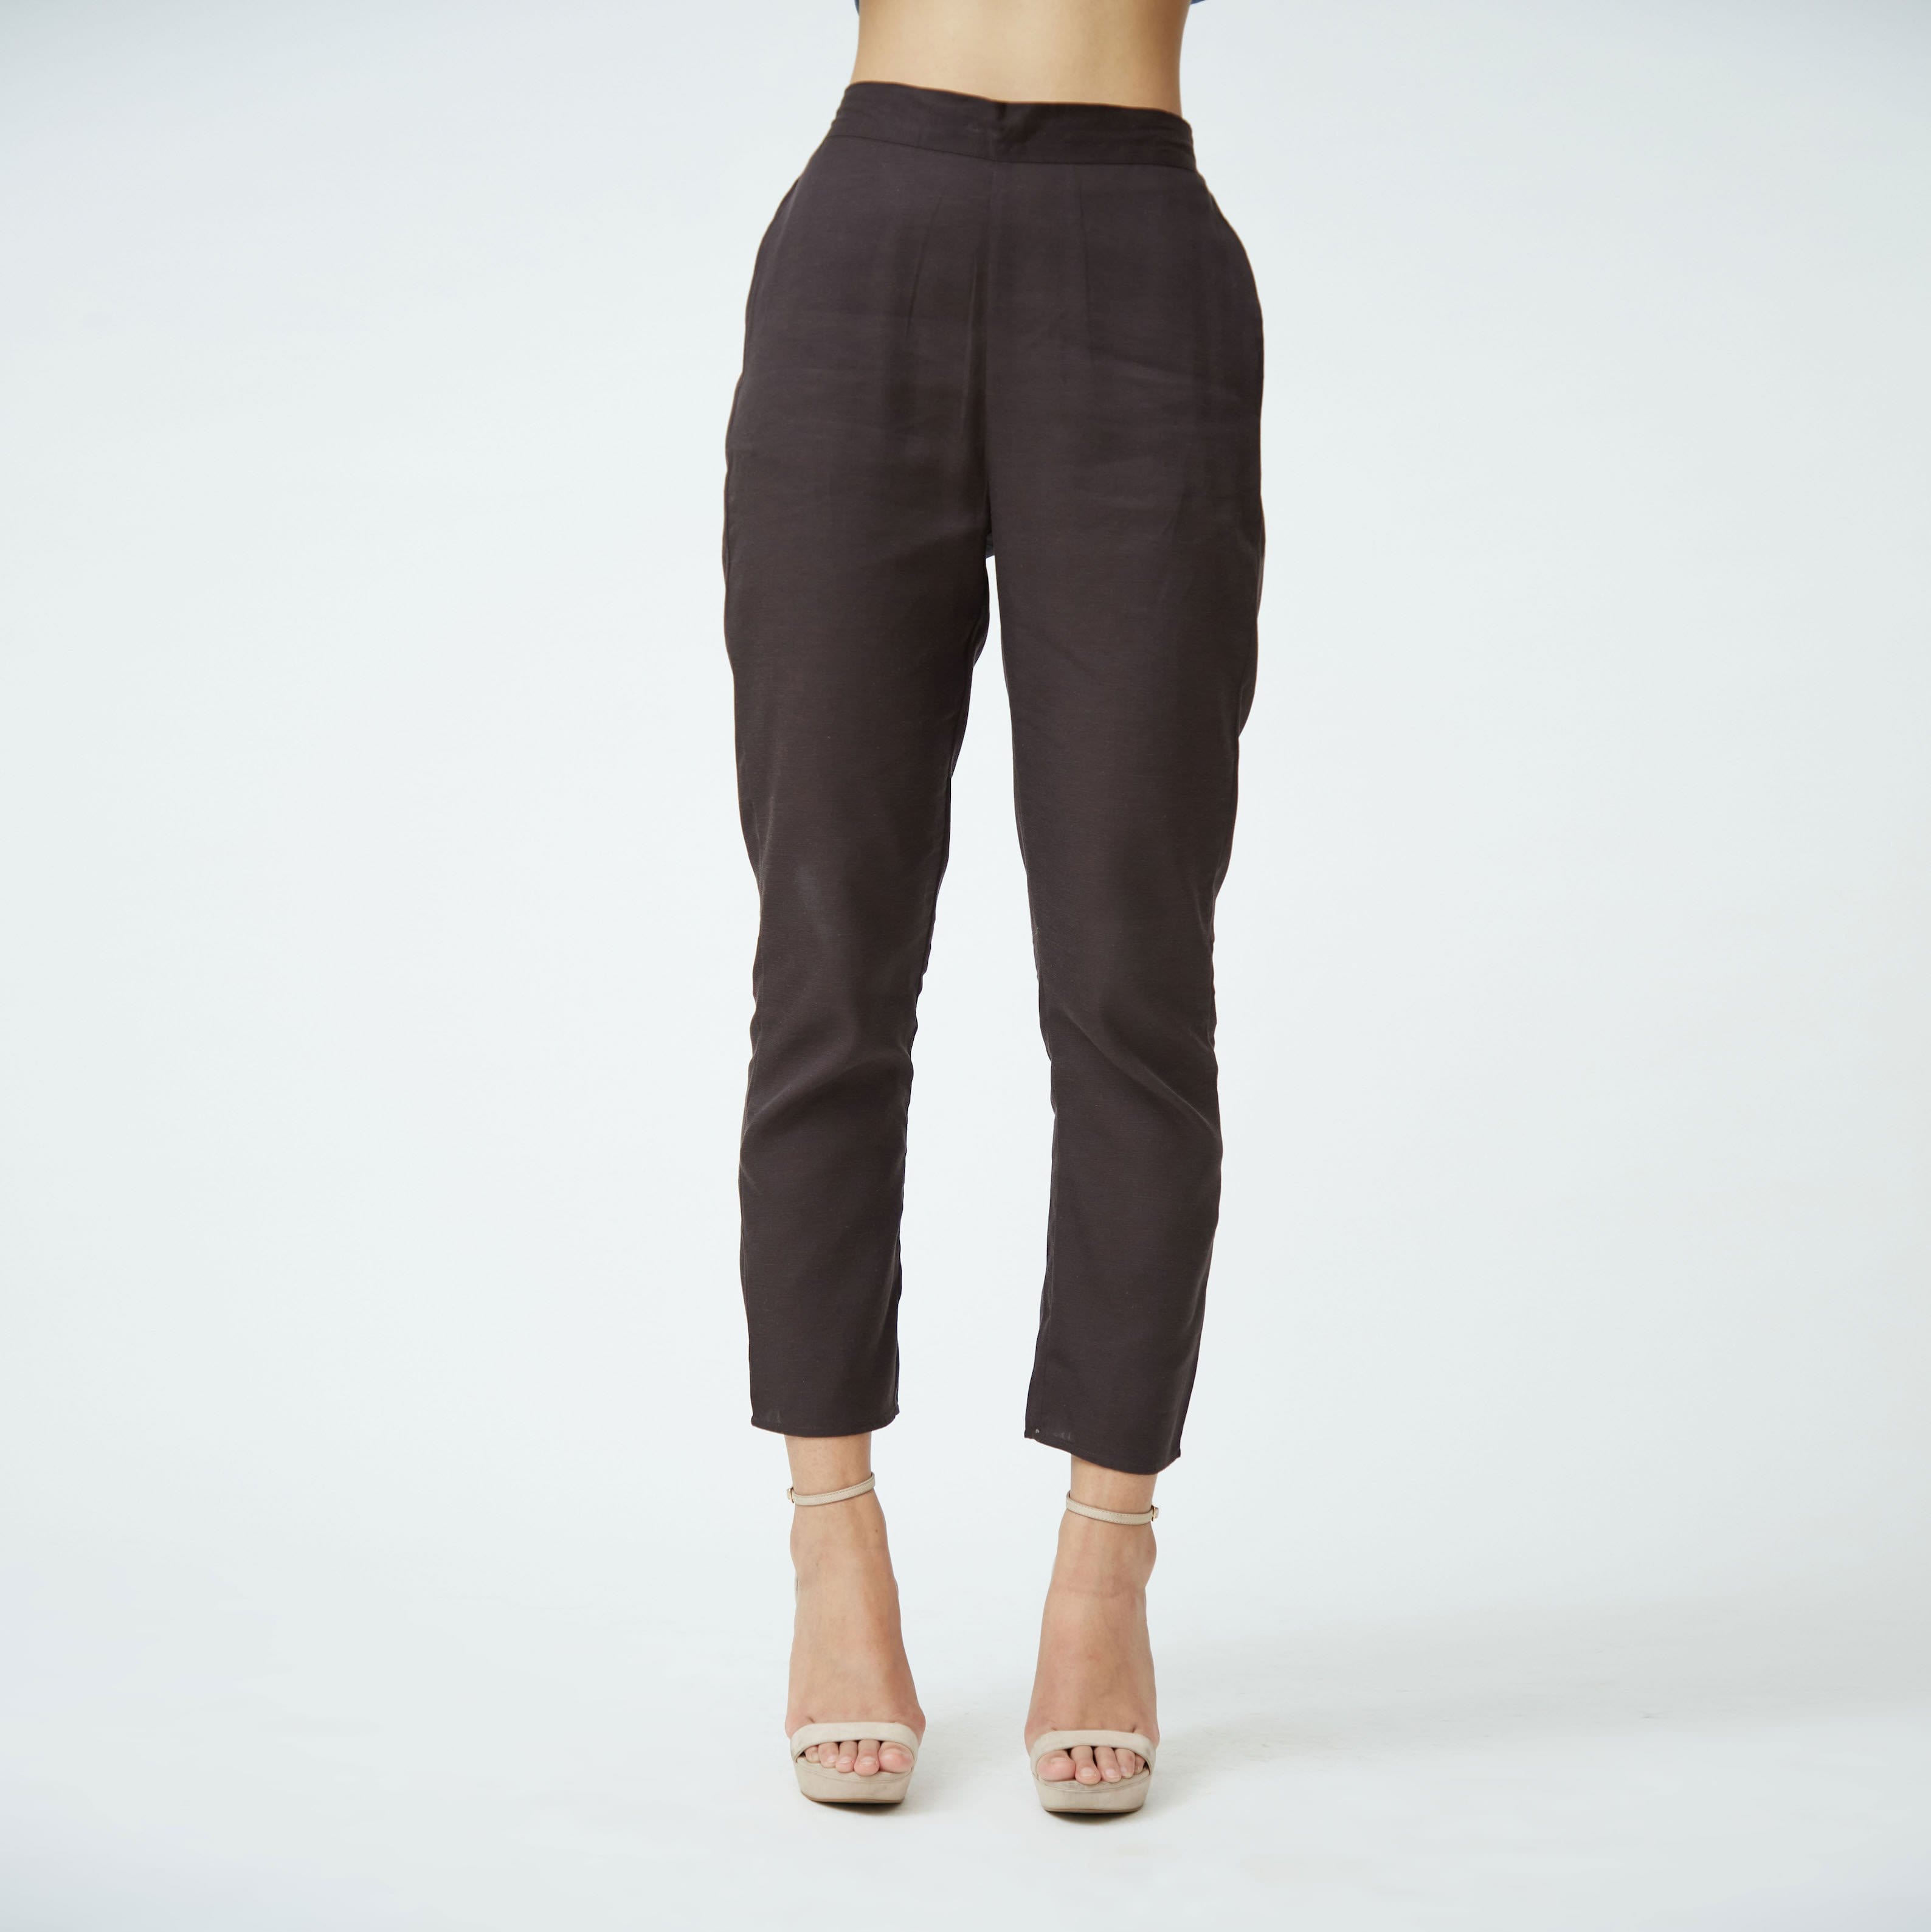 Saltpetre womens wear, indo-western pants for semi formal, casual, occassional wear. Comfortably pencil-shaped ankle-length leg pants in coffee brown colour. Ankle length, back elastic and side pockets.